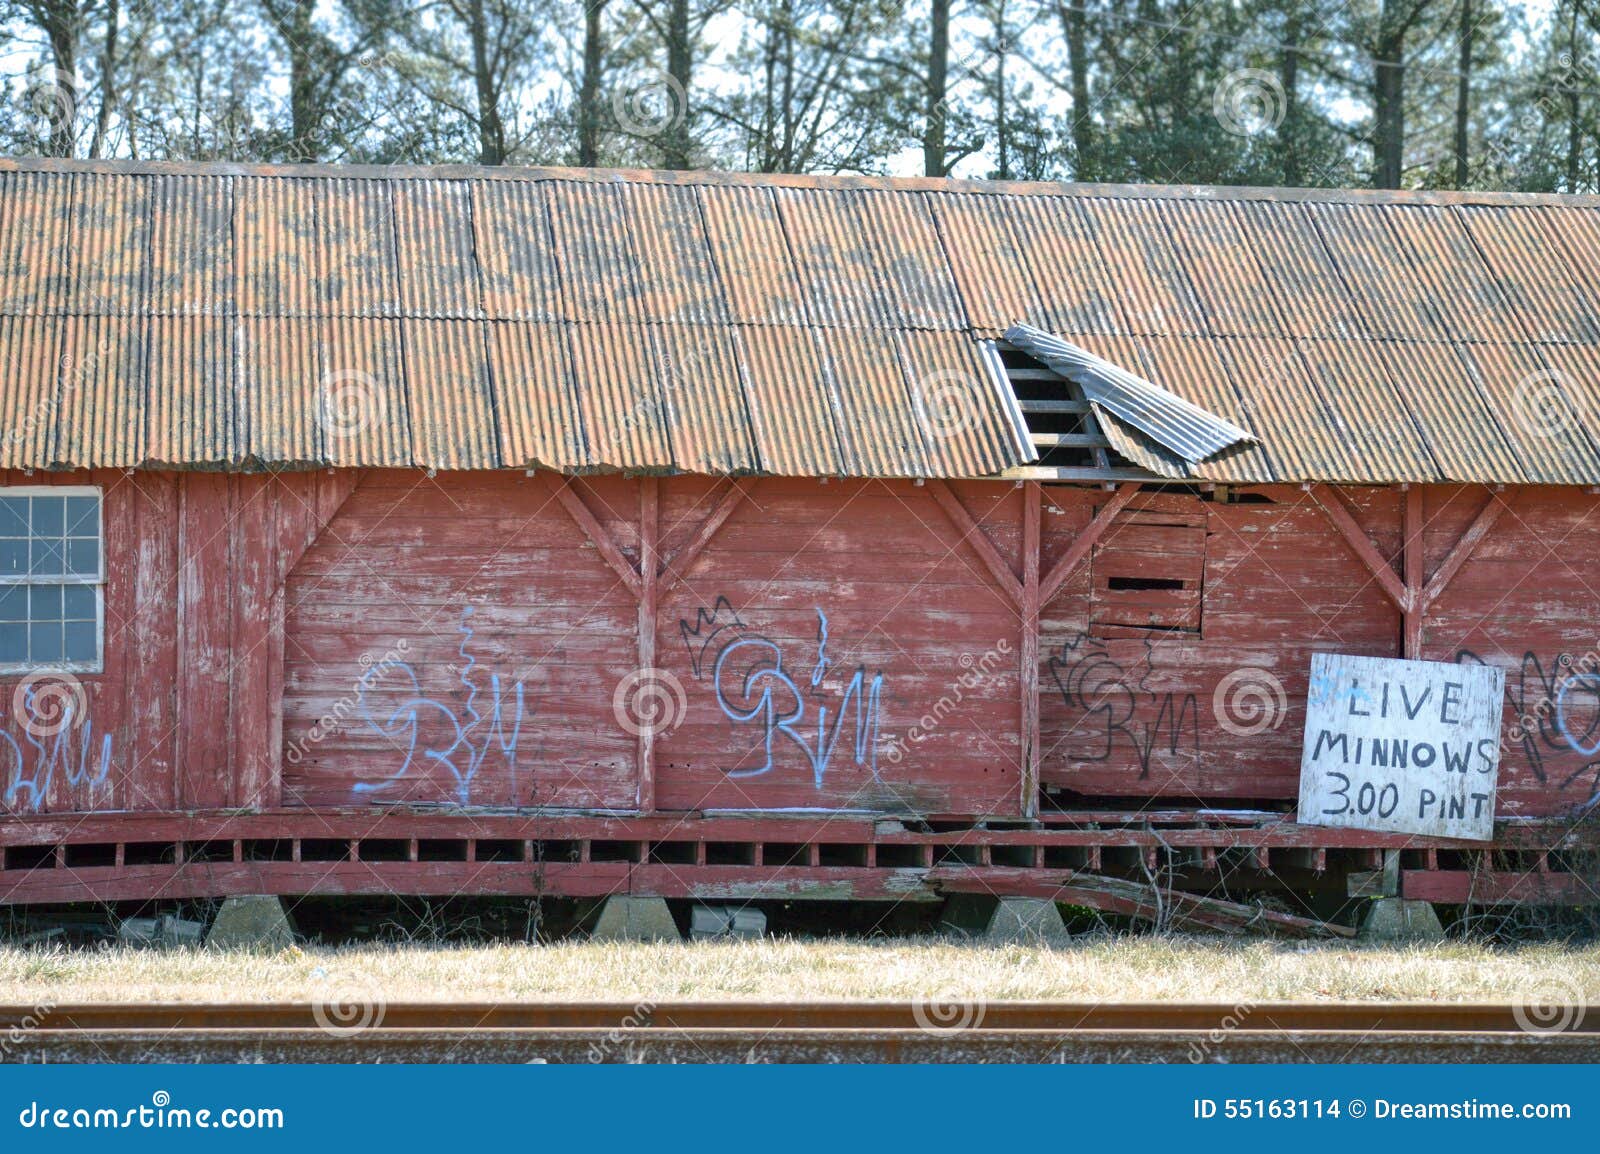 Live Minnows, Dilapidated House by the Train Tracks. Stock Photo